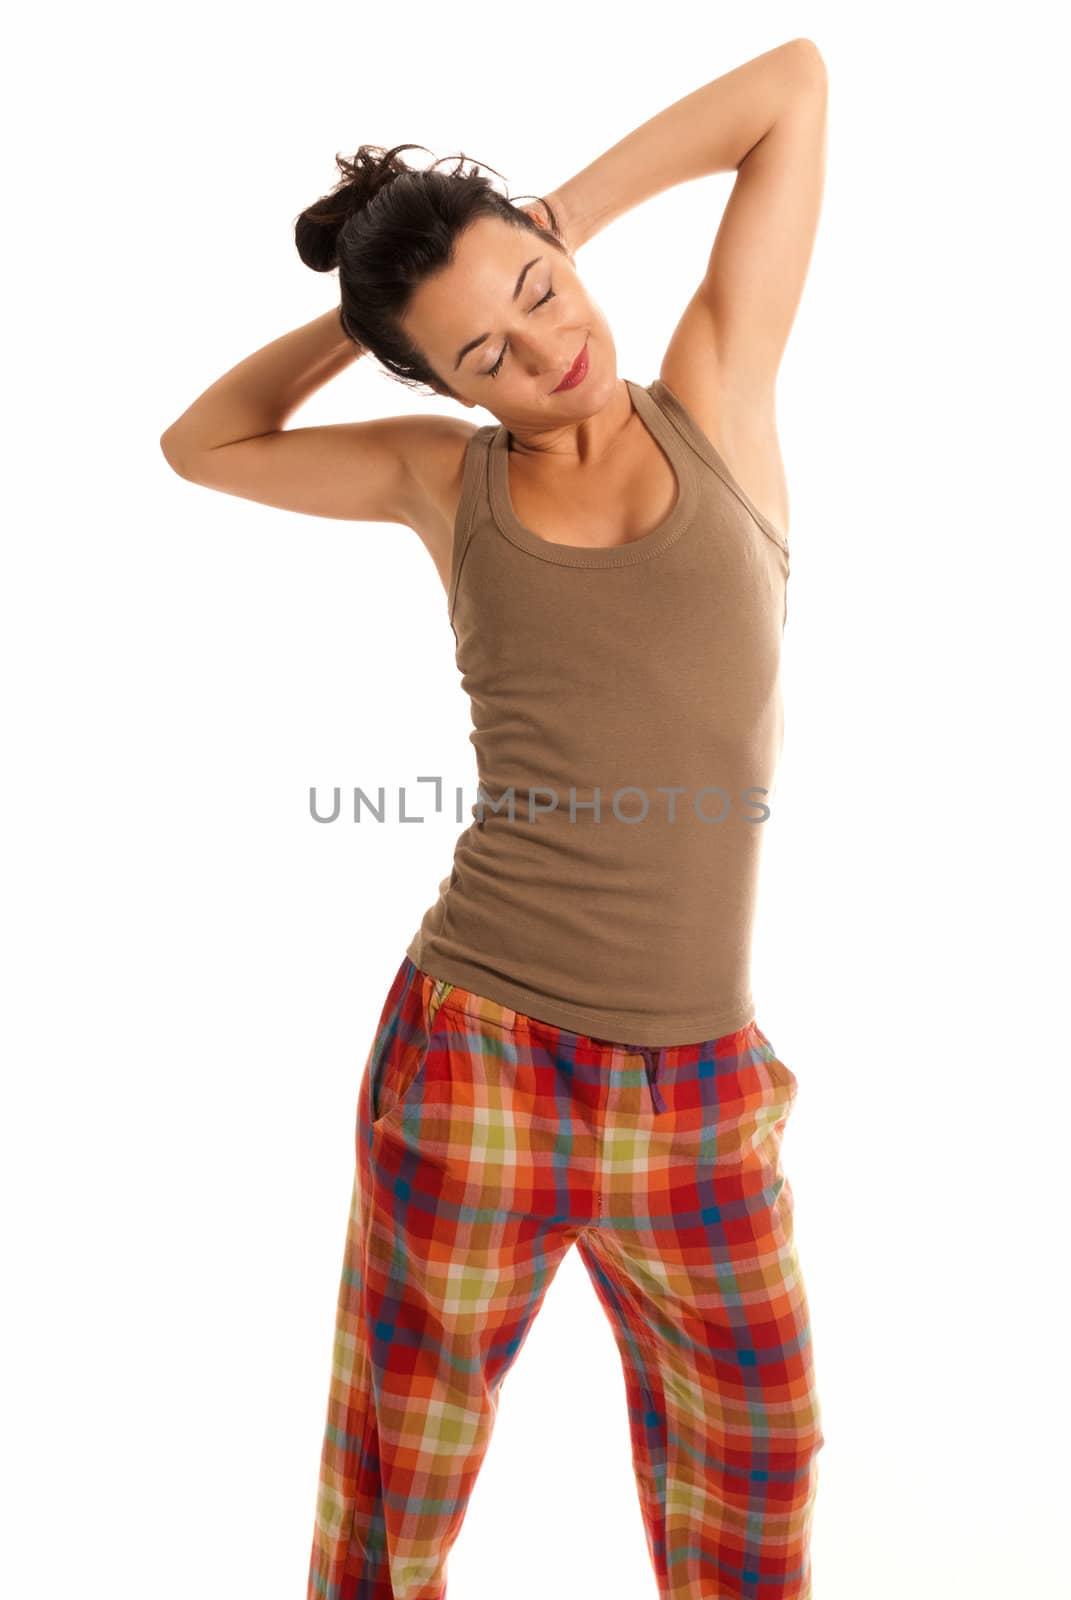 young woman be sleepy wearing pajamas isolated on white 